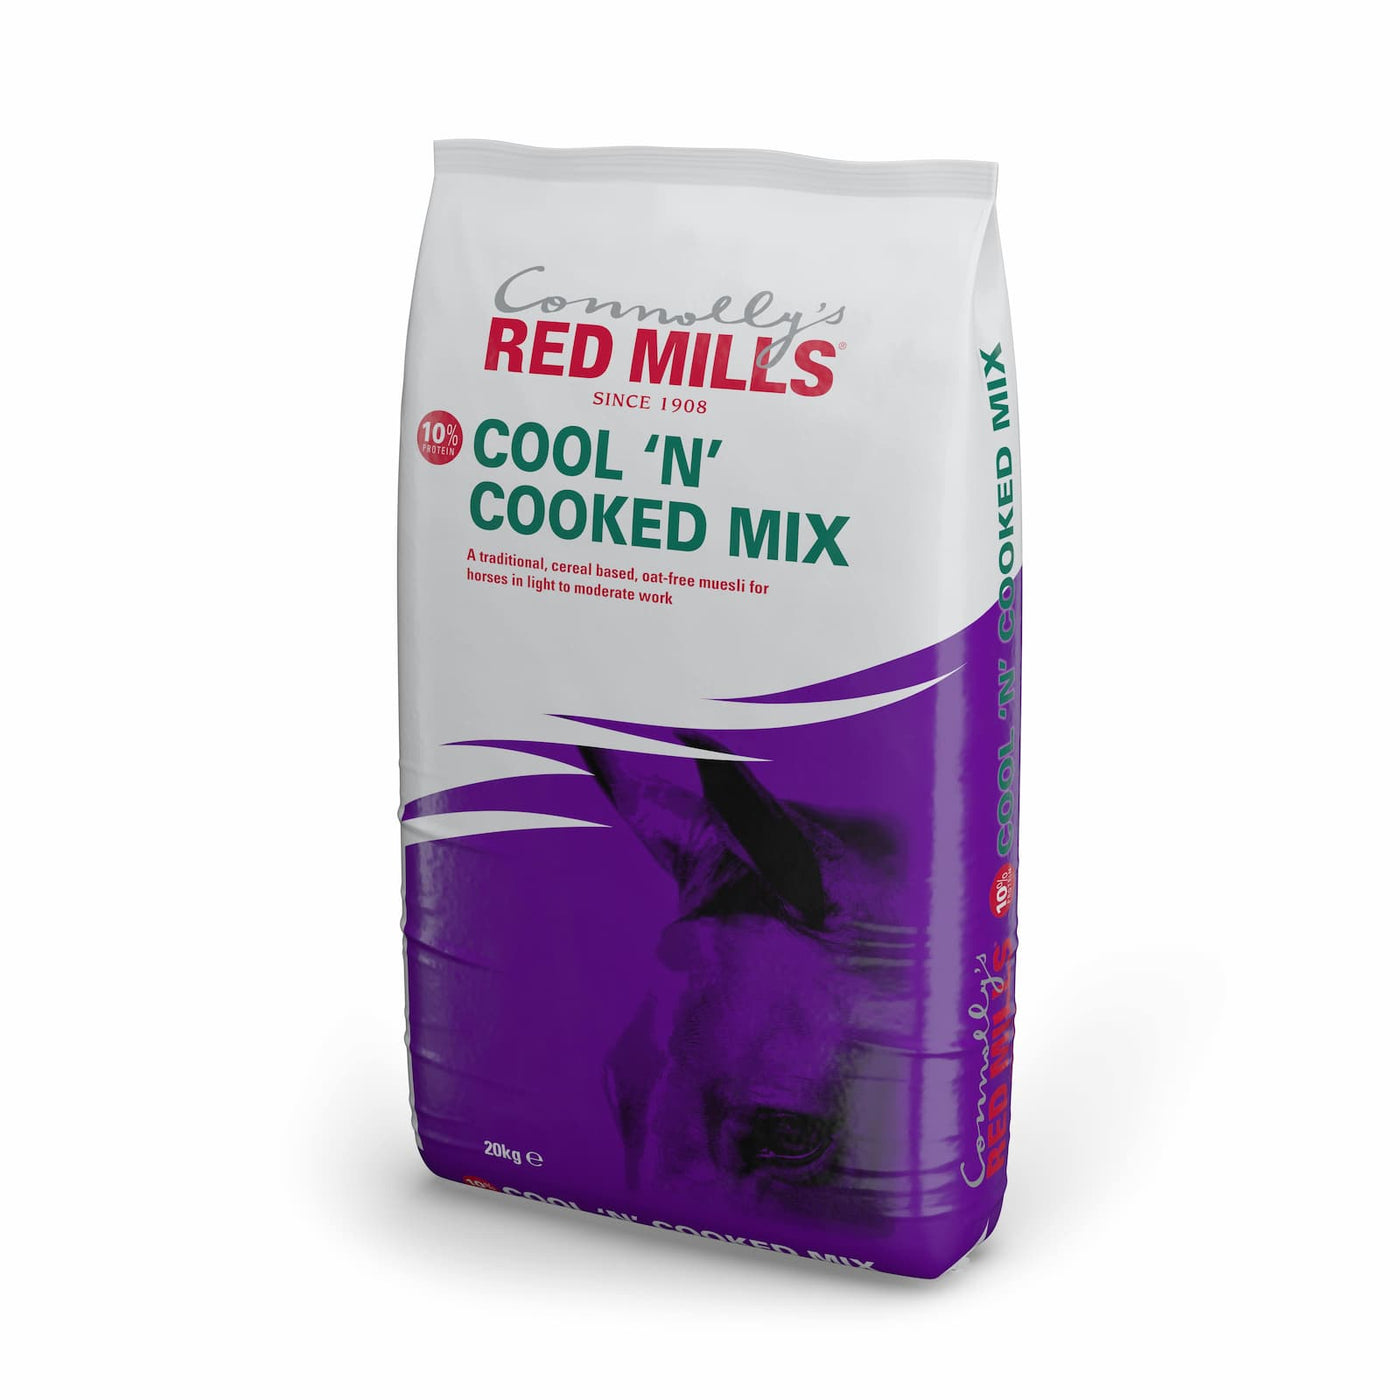 Red Mills Cool ‘N’ Cooked Mix